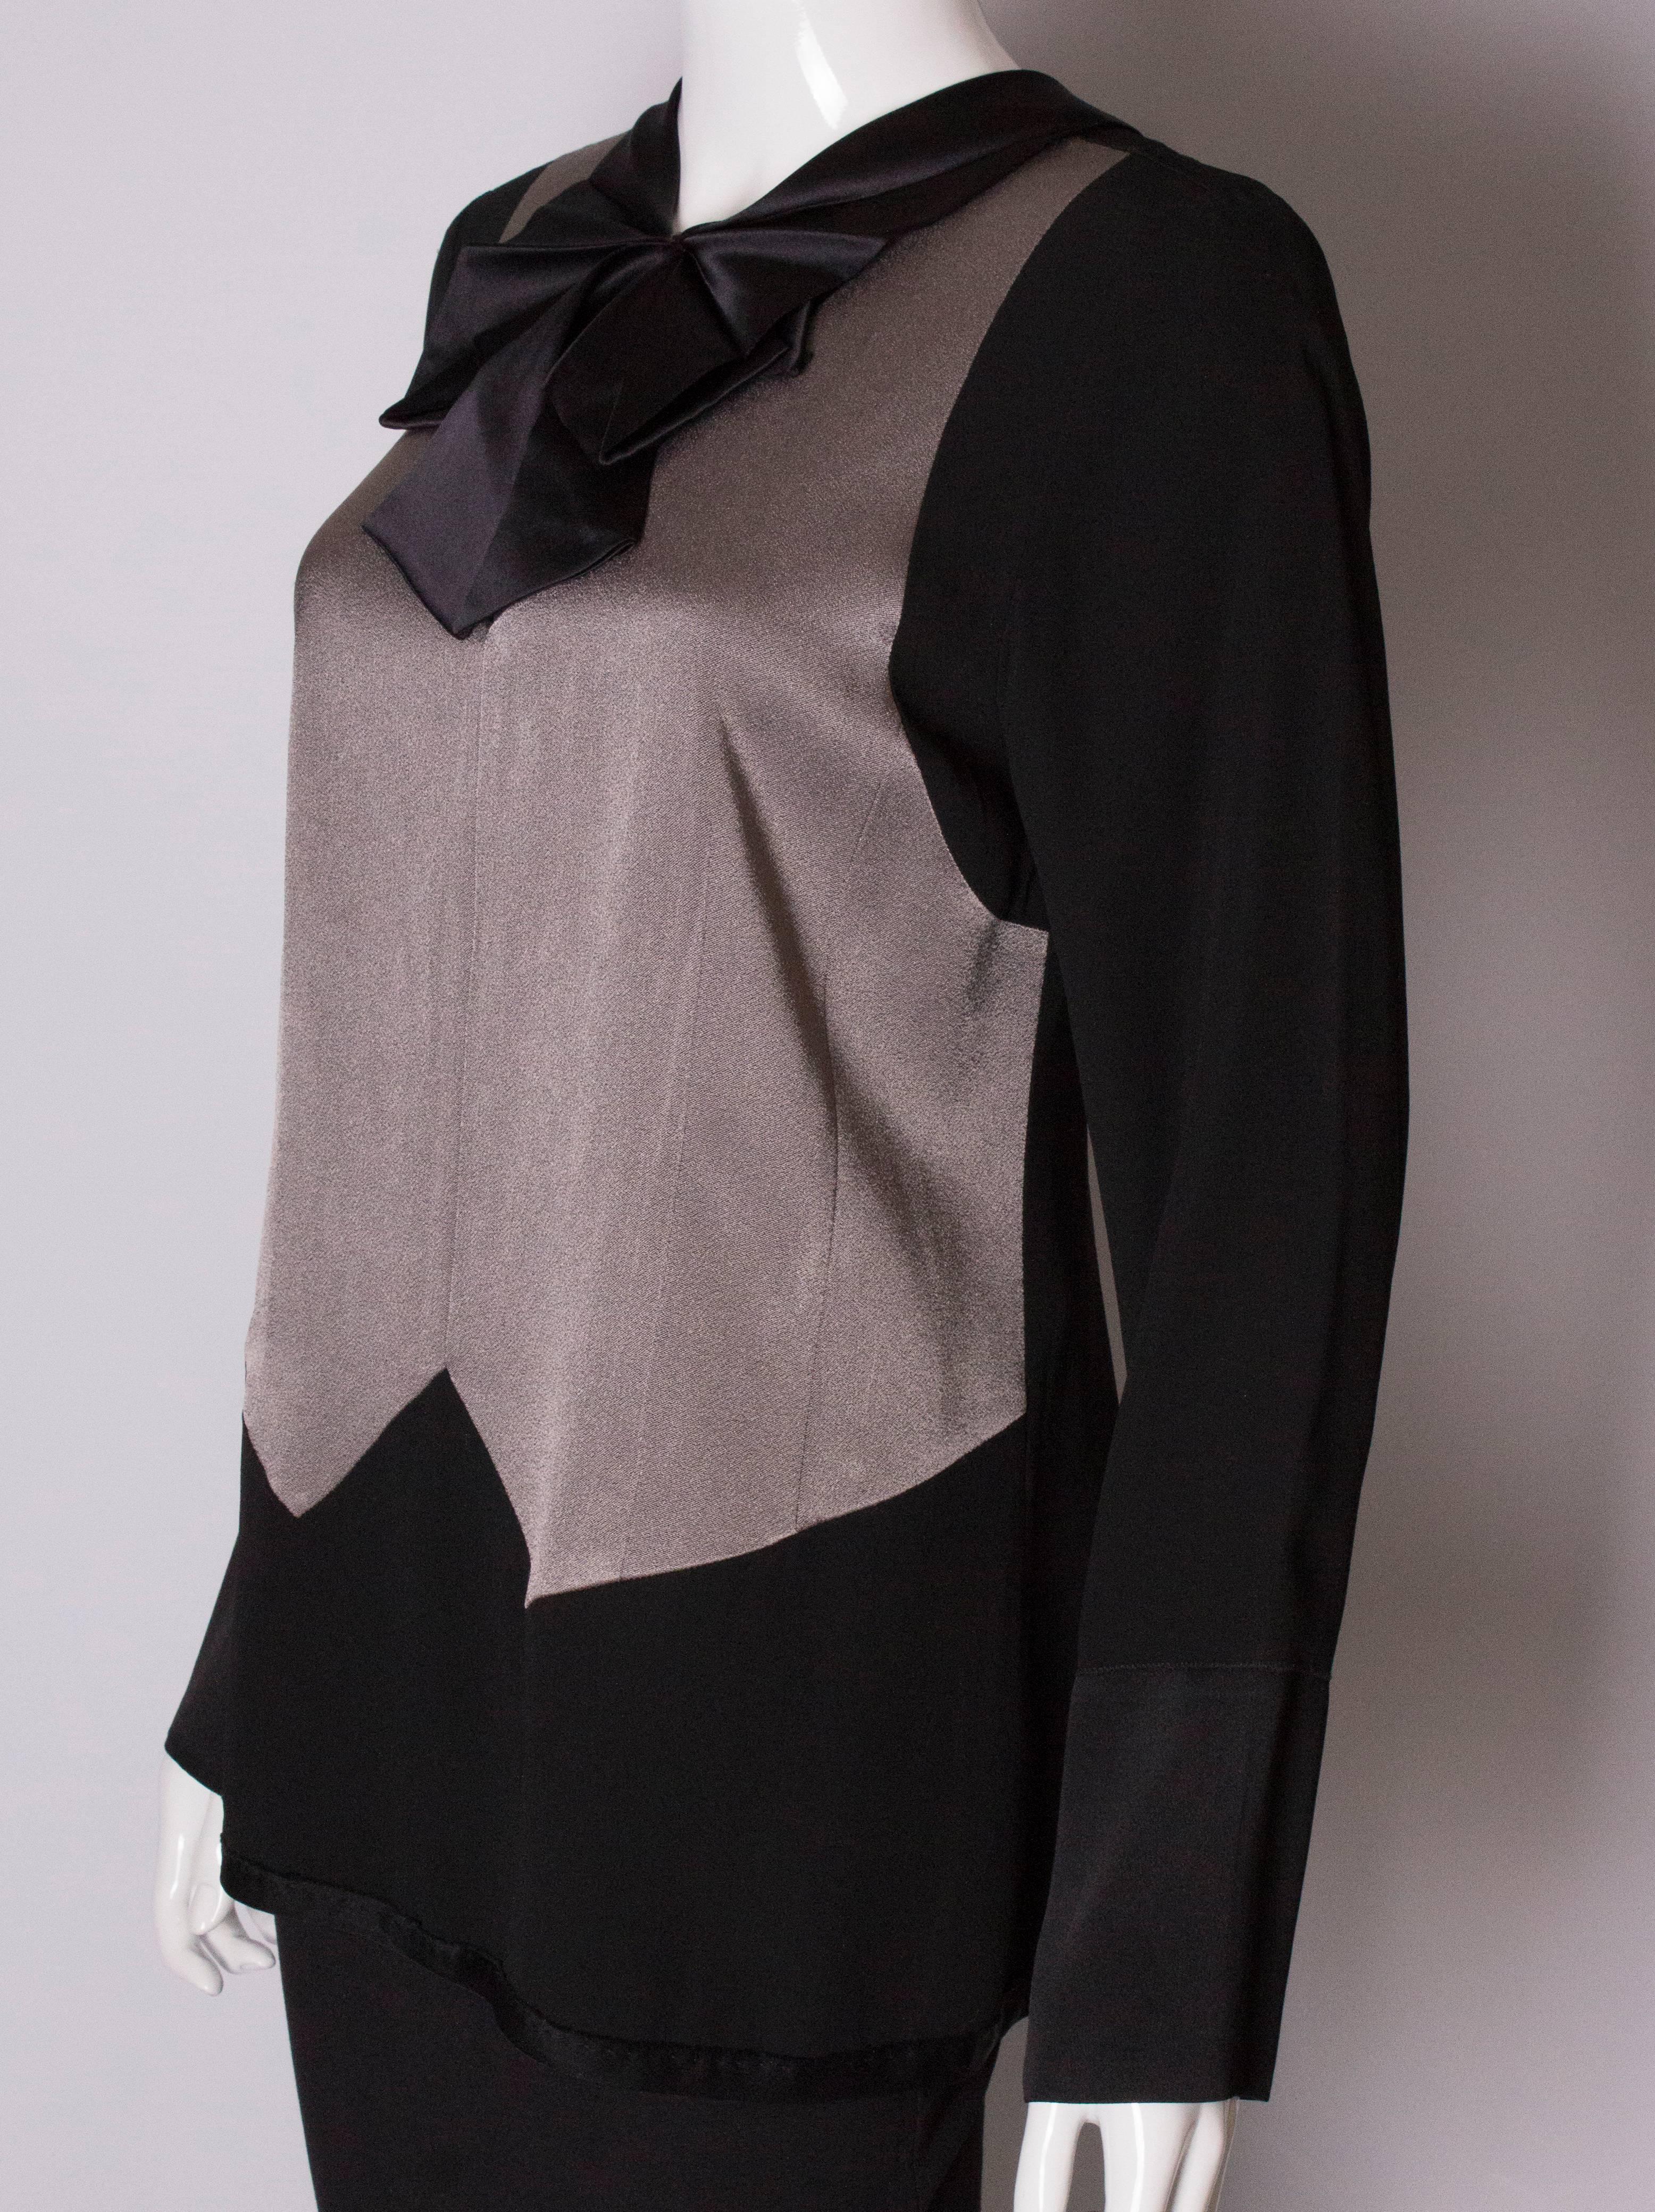 Black Stunning Marc Jacobs Evening Top For Sale